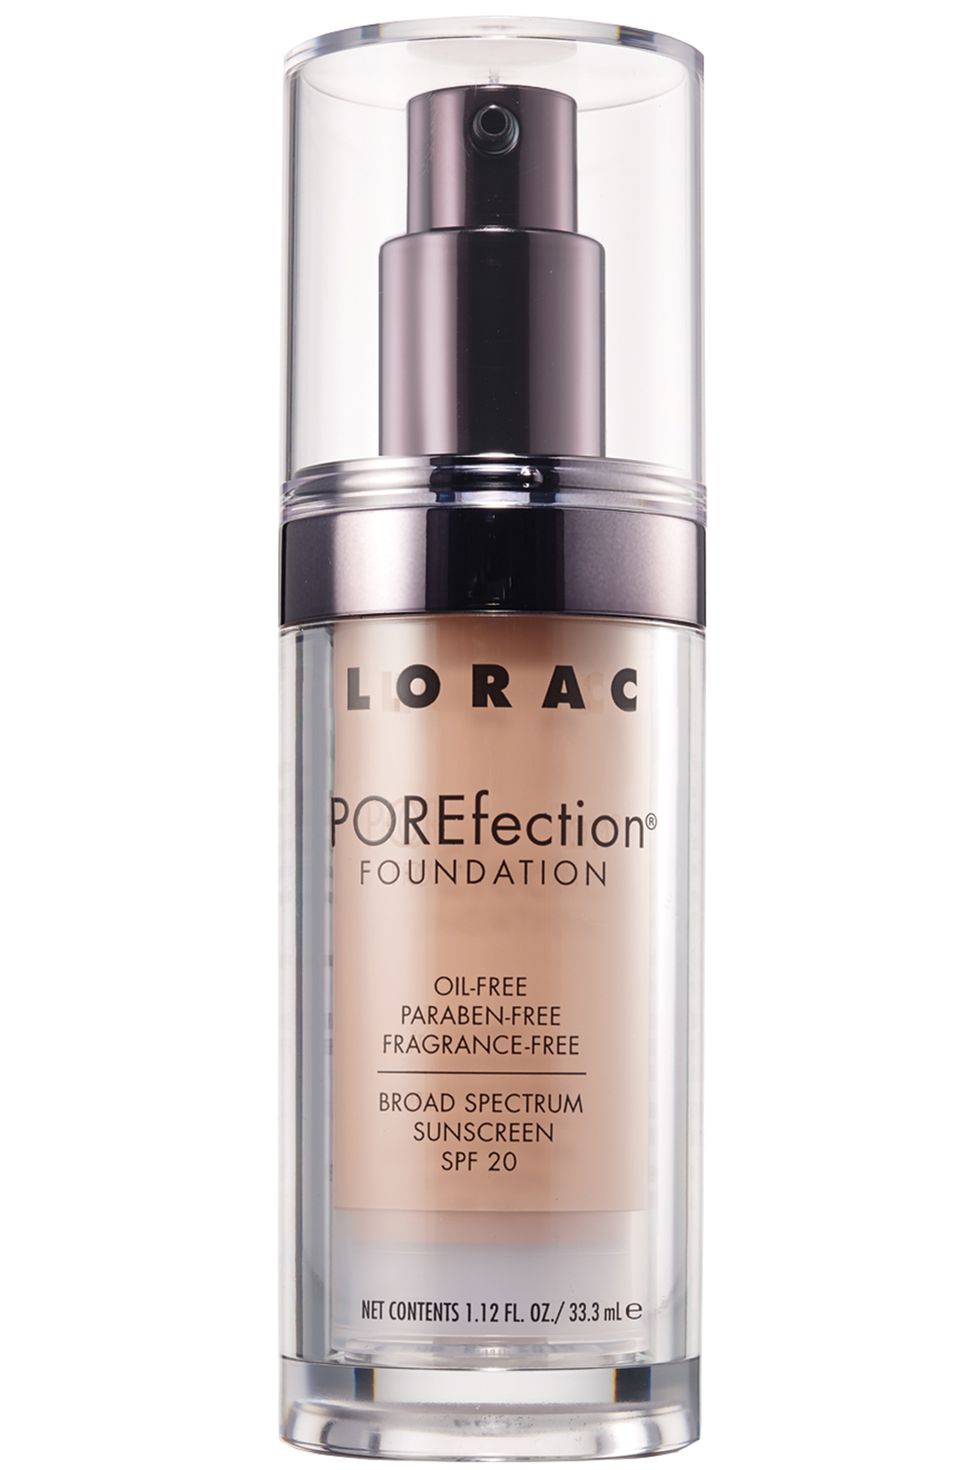 <p>Oil-, paraben- and- fragrance-free, it's perfect for the most sensitive skin types. </p><p><strong>Lorac</strong> POREfection Foundation, $36, <a href="http://www.ulta.com/ulta/browse/productDetail.jsp?productId=xlsImpprod6371208" target="_blank">ulta.com</a>.</p>